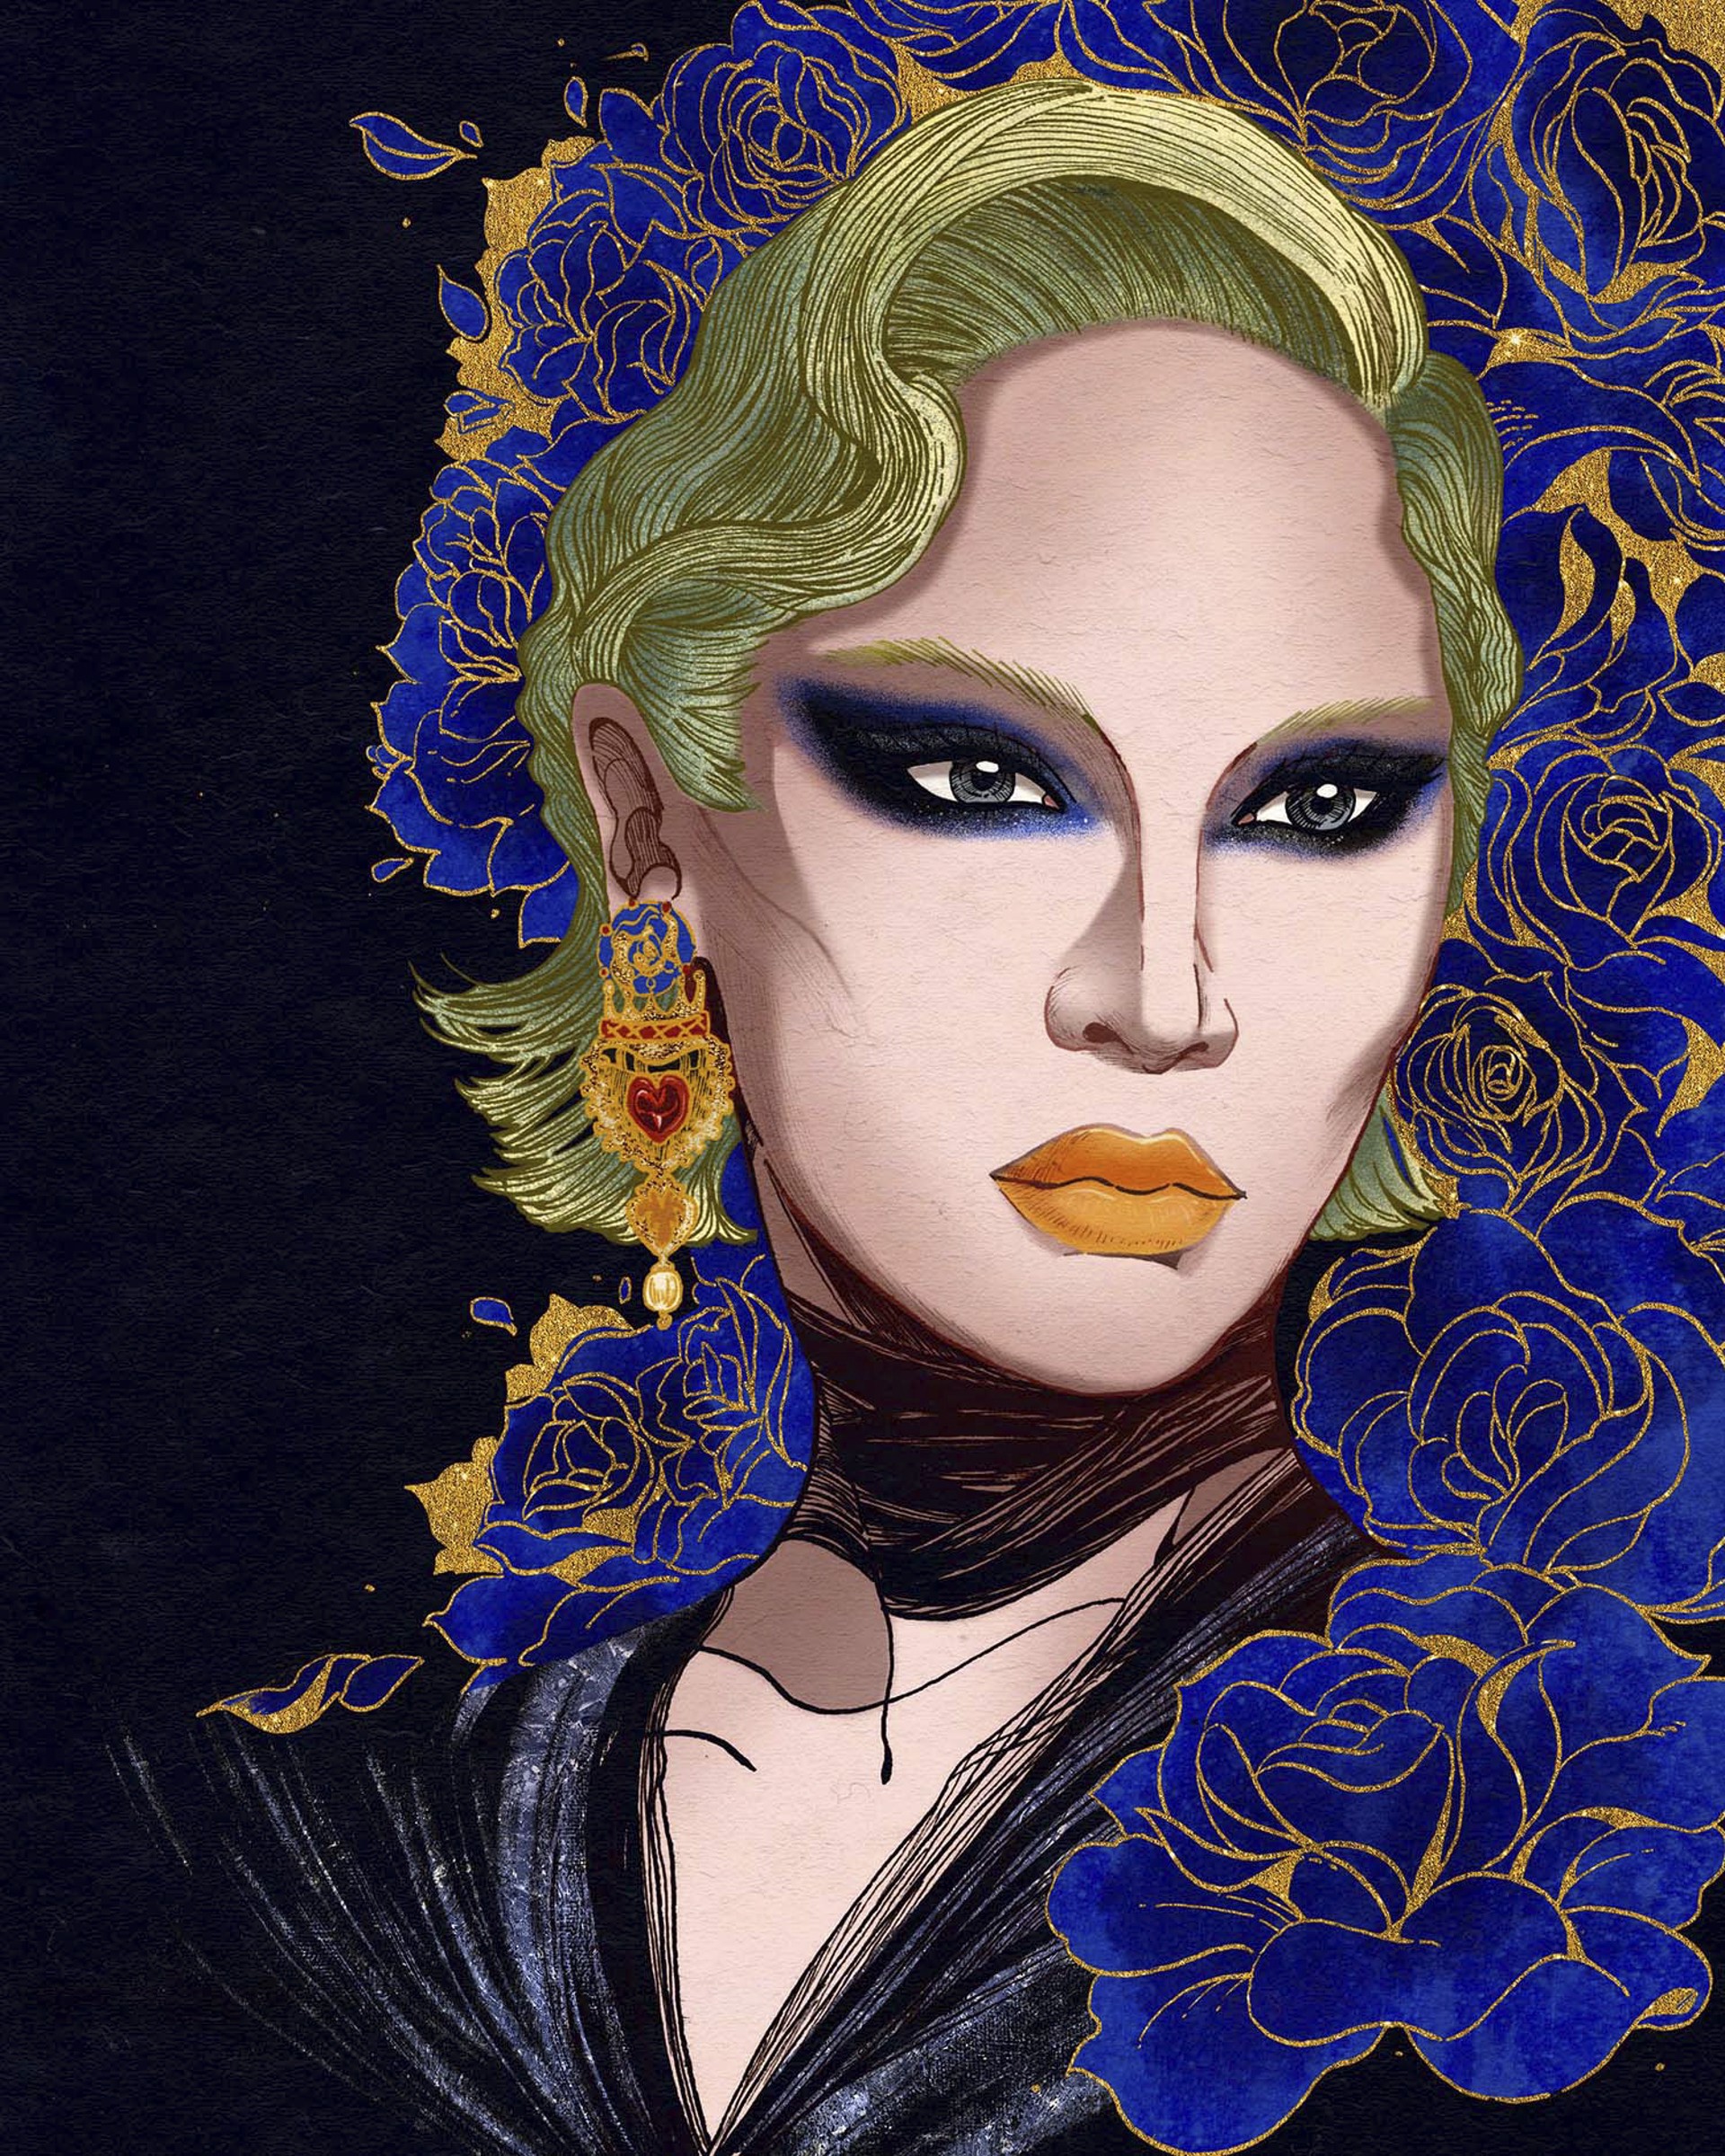 Drag queen Portrait Series - Miss Fame- by Yidan Niu